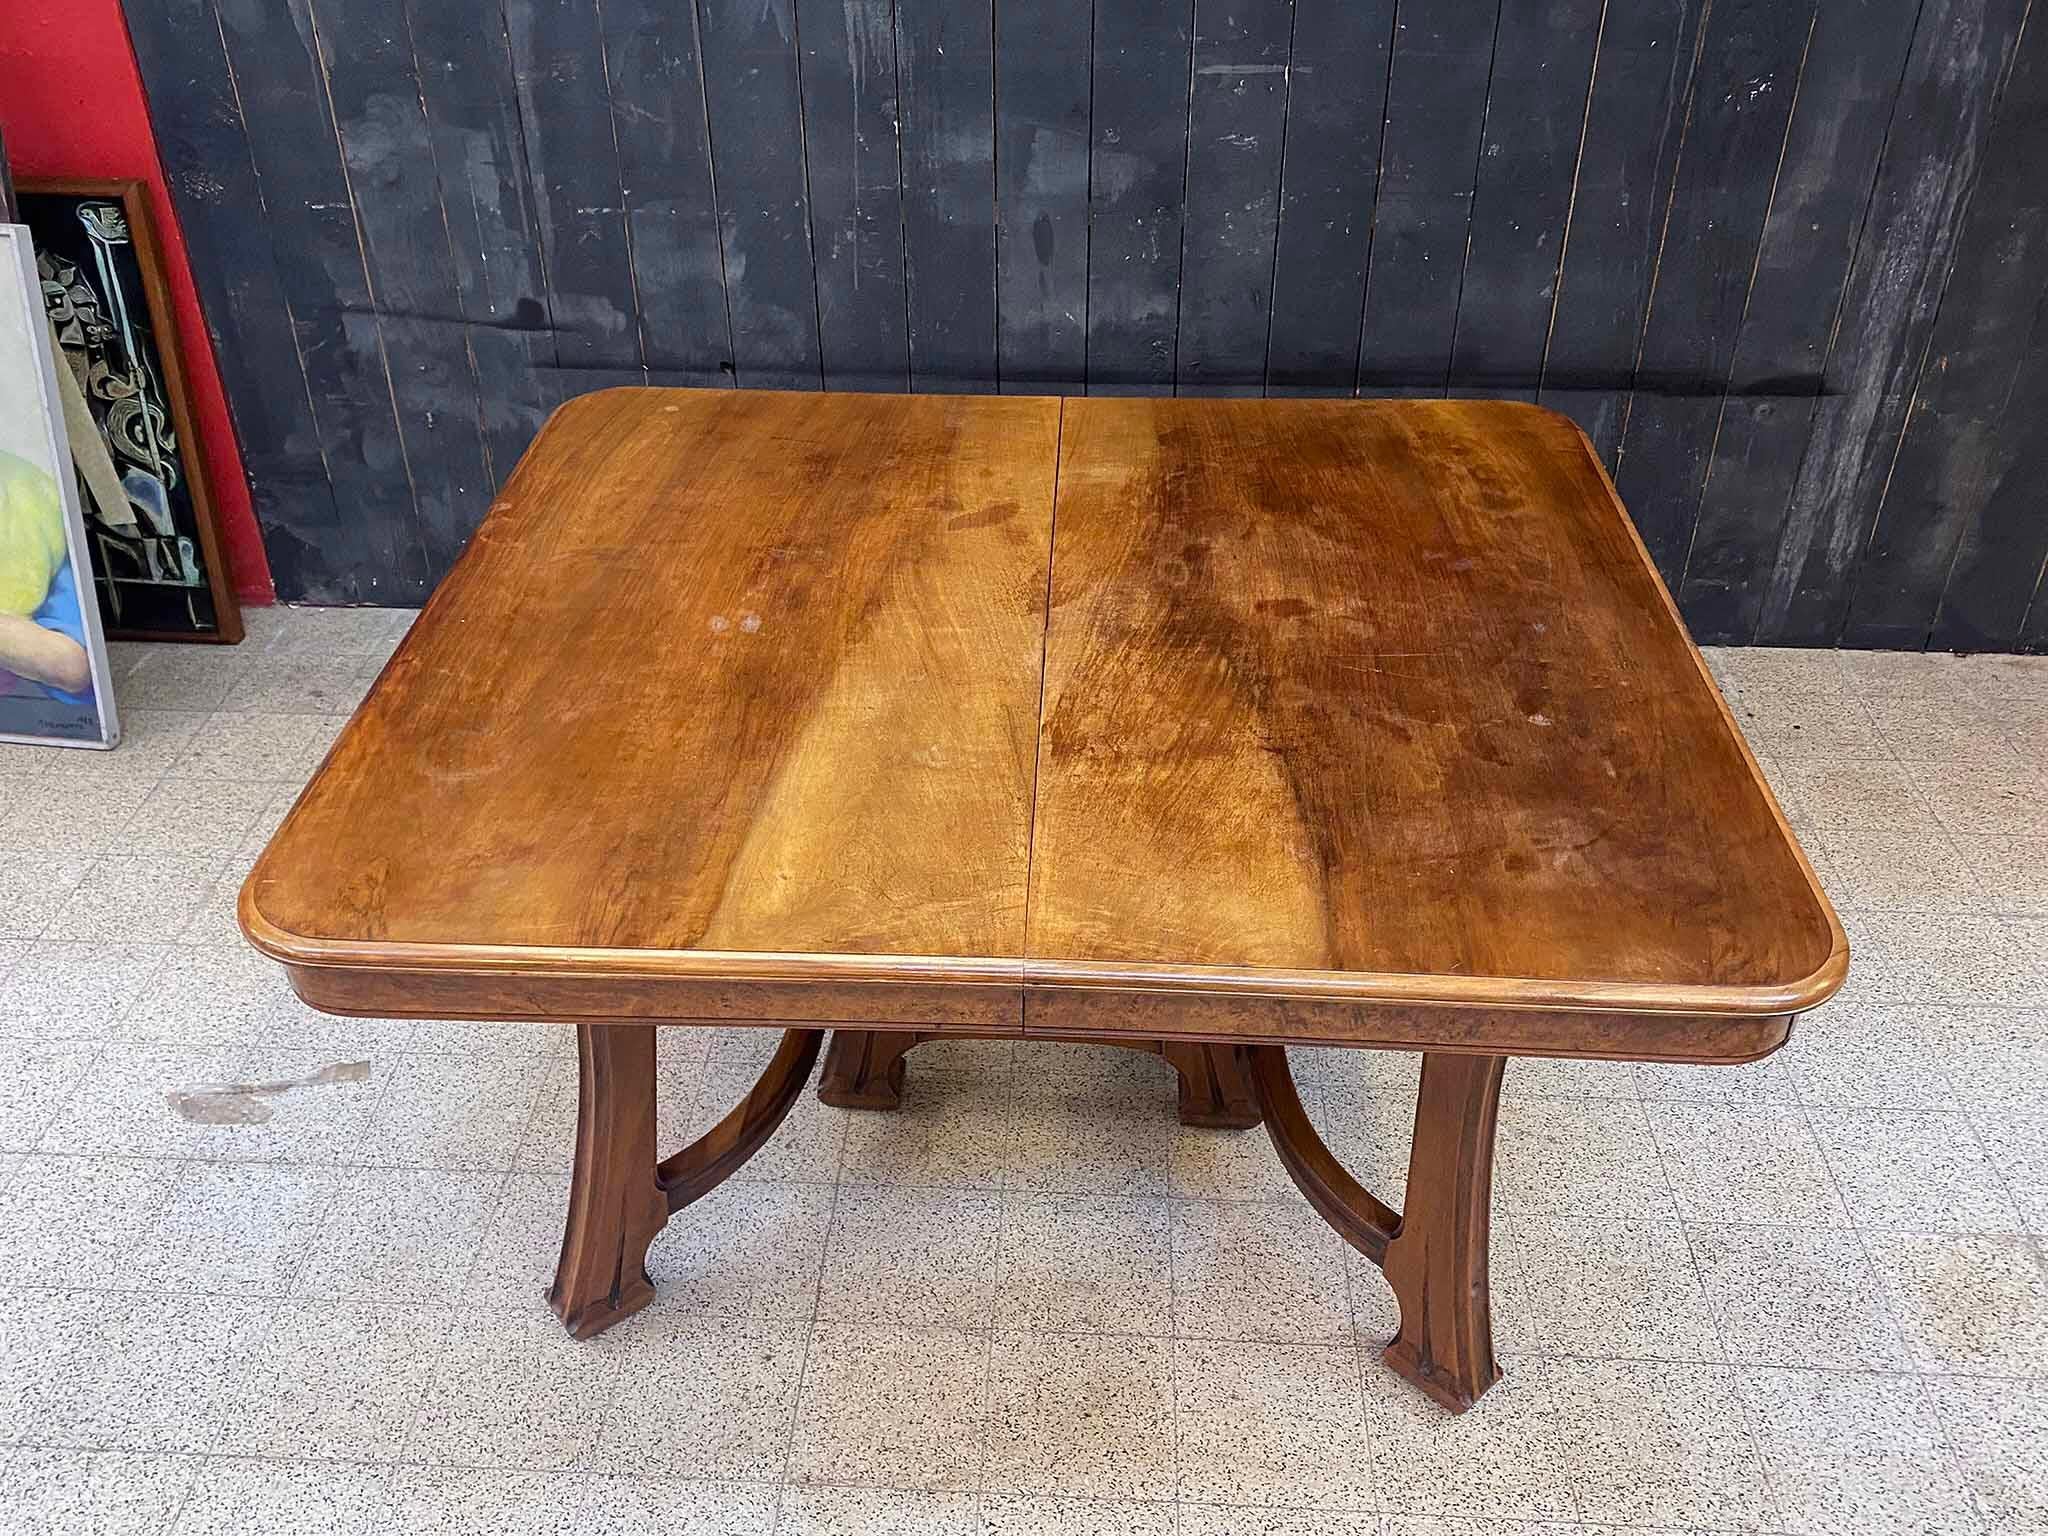 Attributed to Gauthier-Poinsignon & Cie, Art Nouveau Dining Room Table in Walnut In Good Condition For Sale In Mouscron, WHT